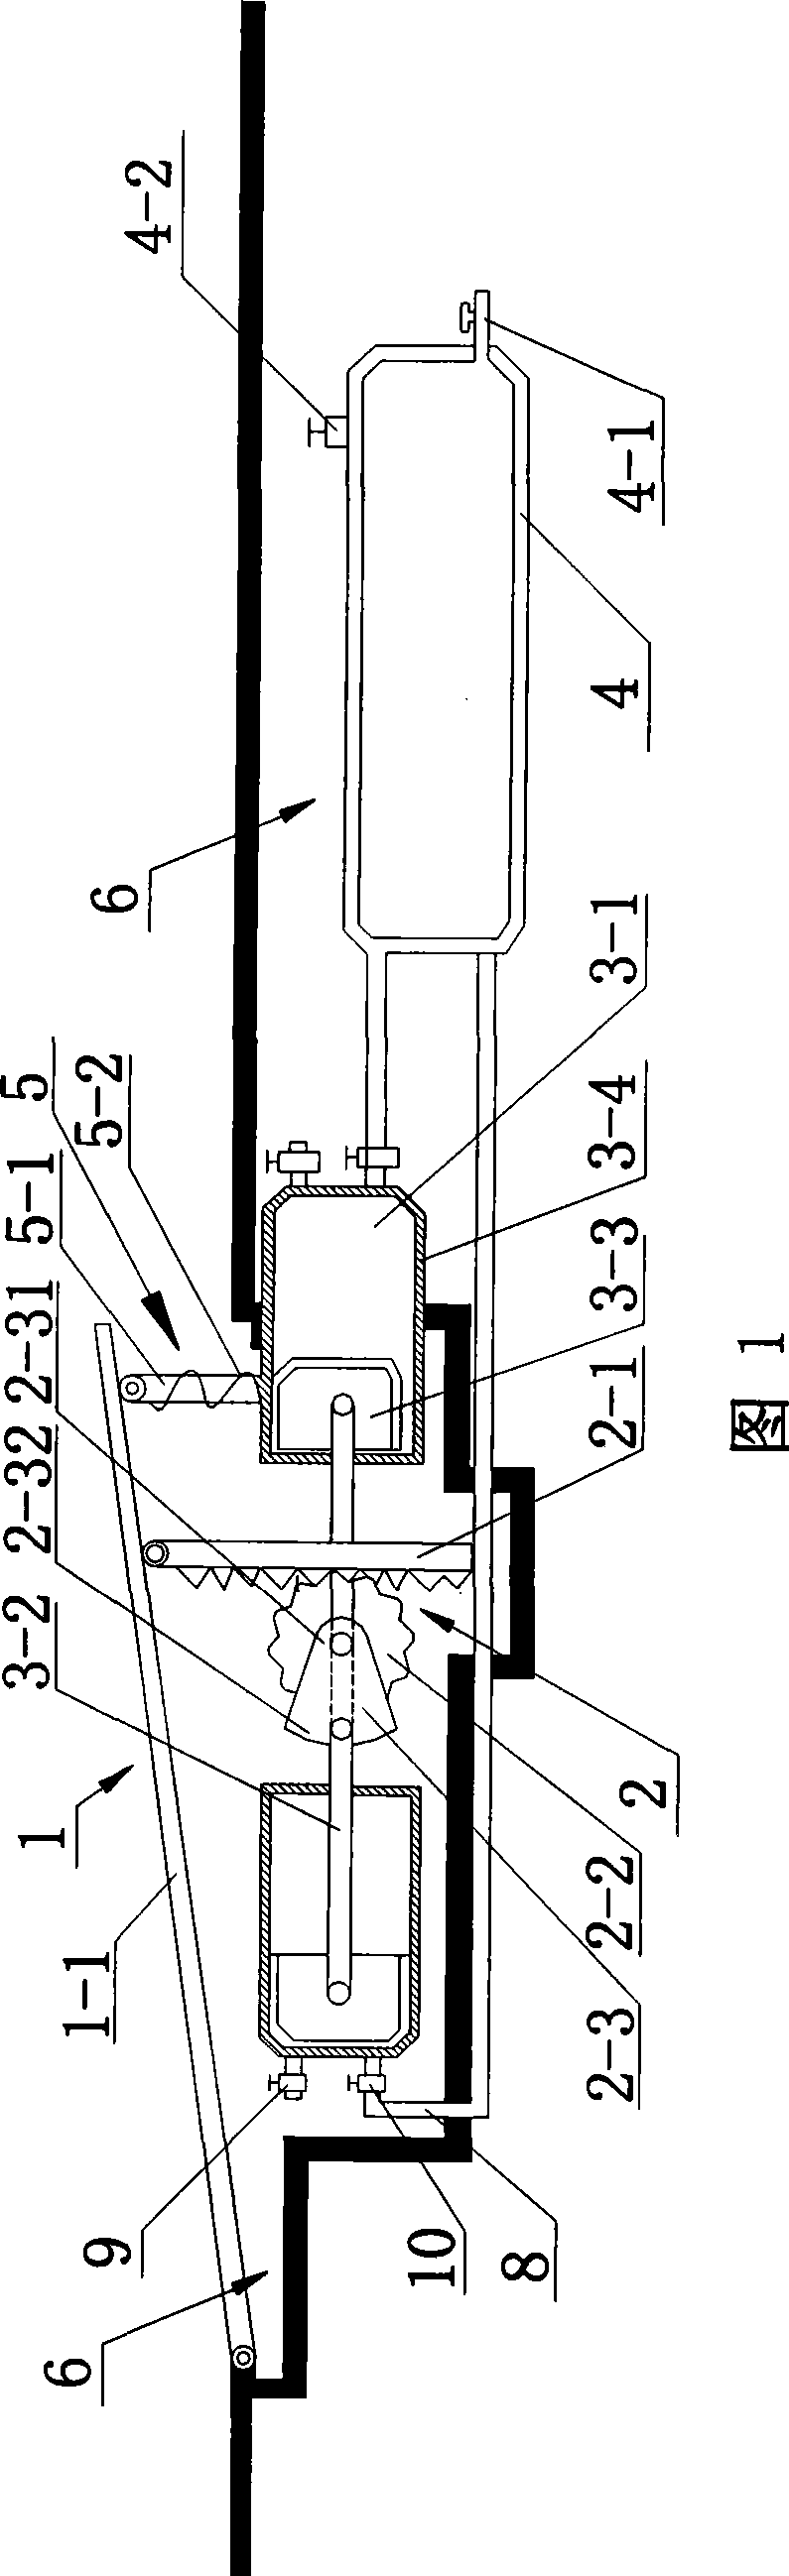 Apparatus for collecting compressed air by ambient pressure